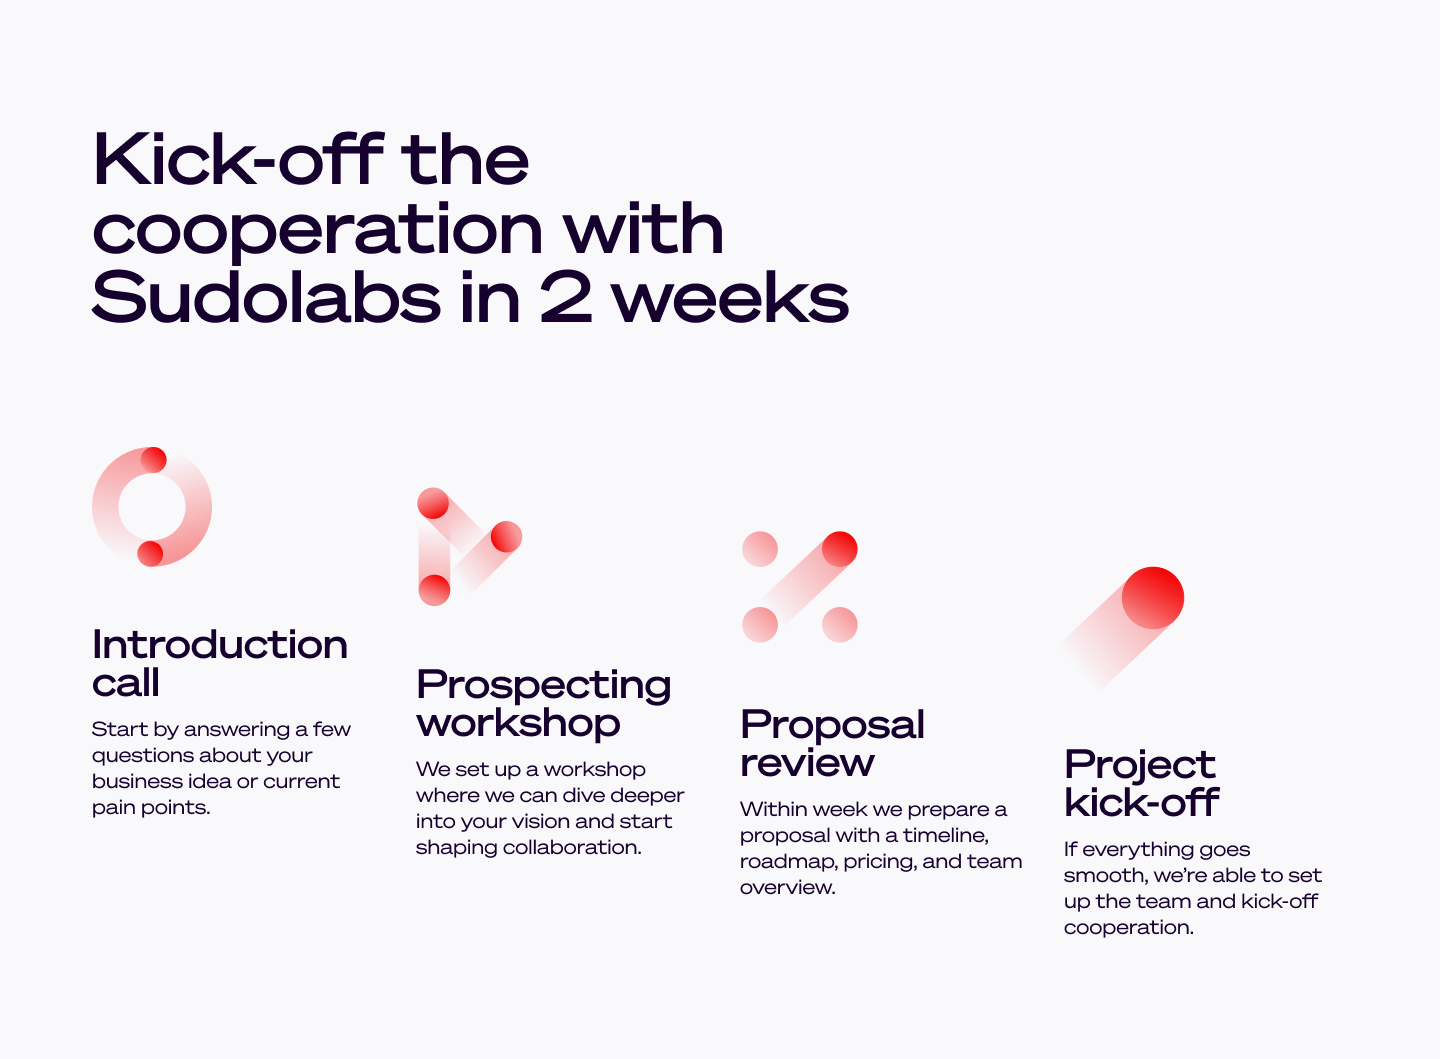 Infographic outlining Sudolab's streamlined collaboration kickoff process. The four stages include Introduction Call, Prospecting Workshop, Proposal Review, and Project Kick Off, all designed to enable fast collaboration initiation within two weeks.